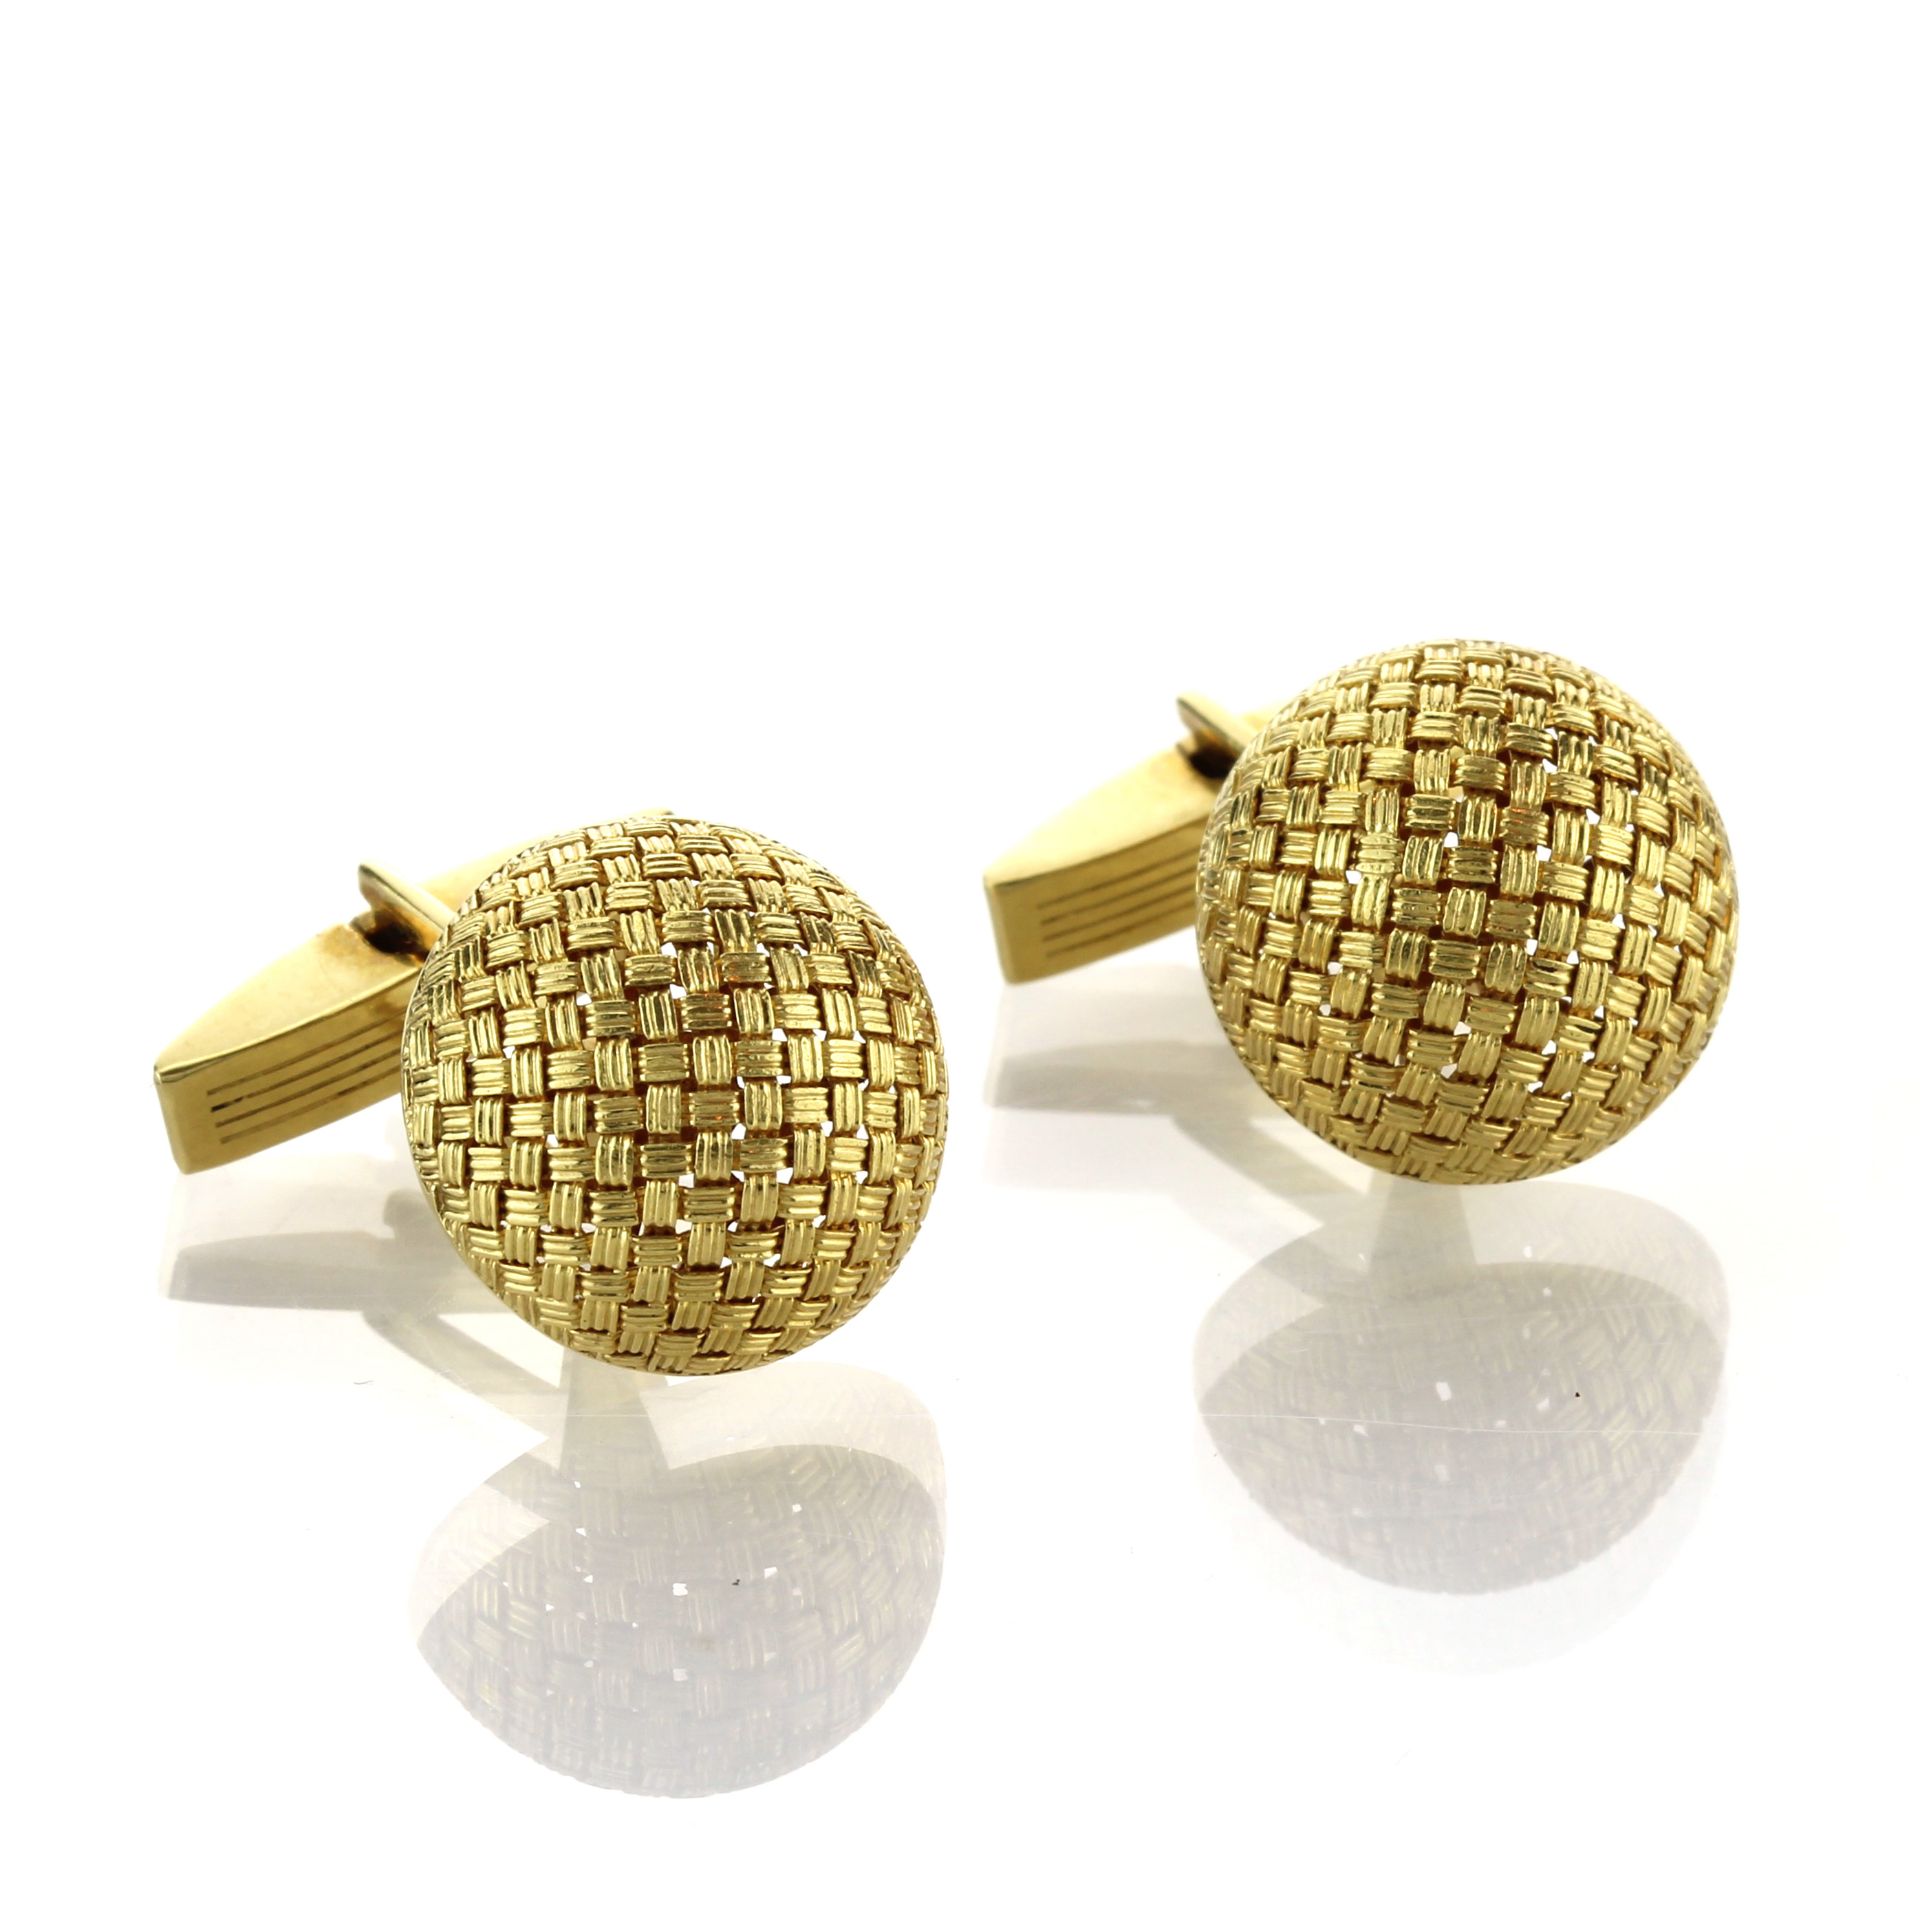 A pair of basketweave cufflinks in 18ct yellow gold each designed as a large, rounded link with